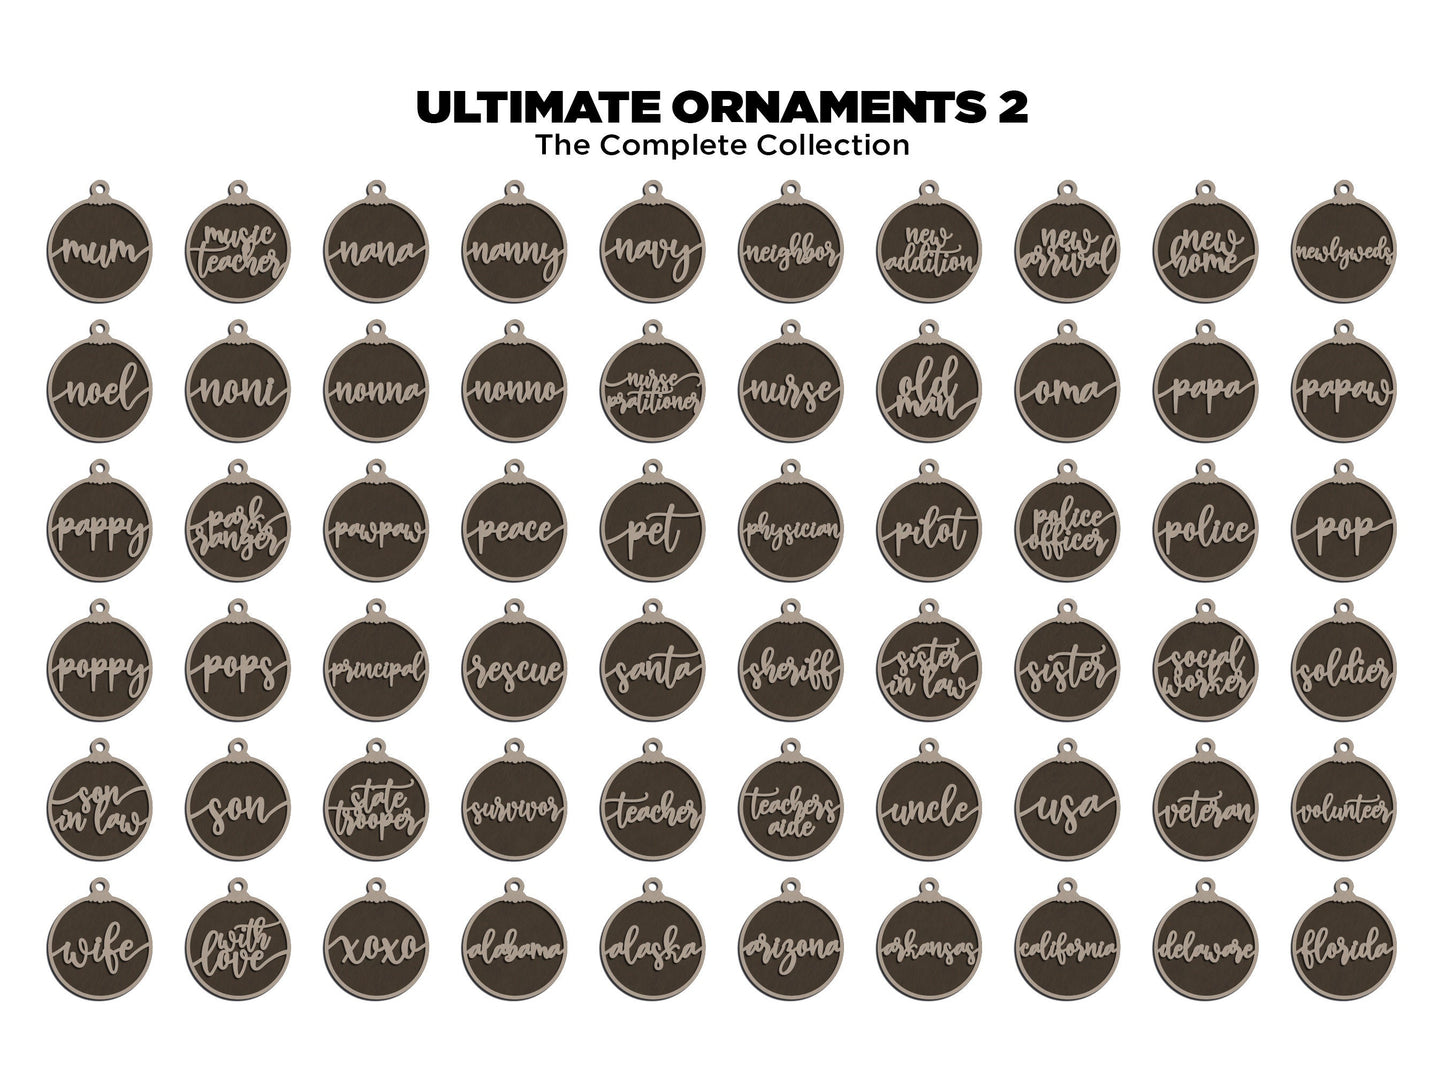 Ultimate Ornaments 2 - 250+ Top Layers and 50+ interchangeable Backings - SVG, PDF, AI File Download - Sized for Glowforge